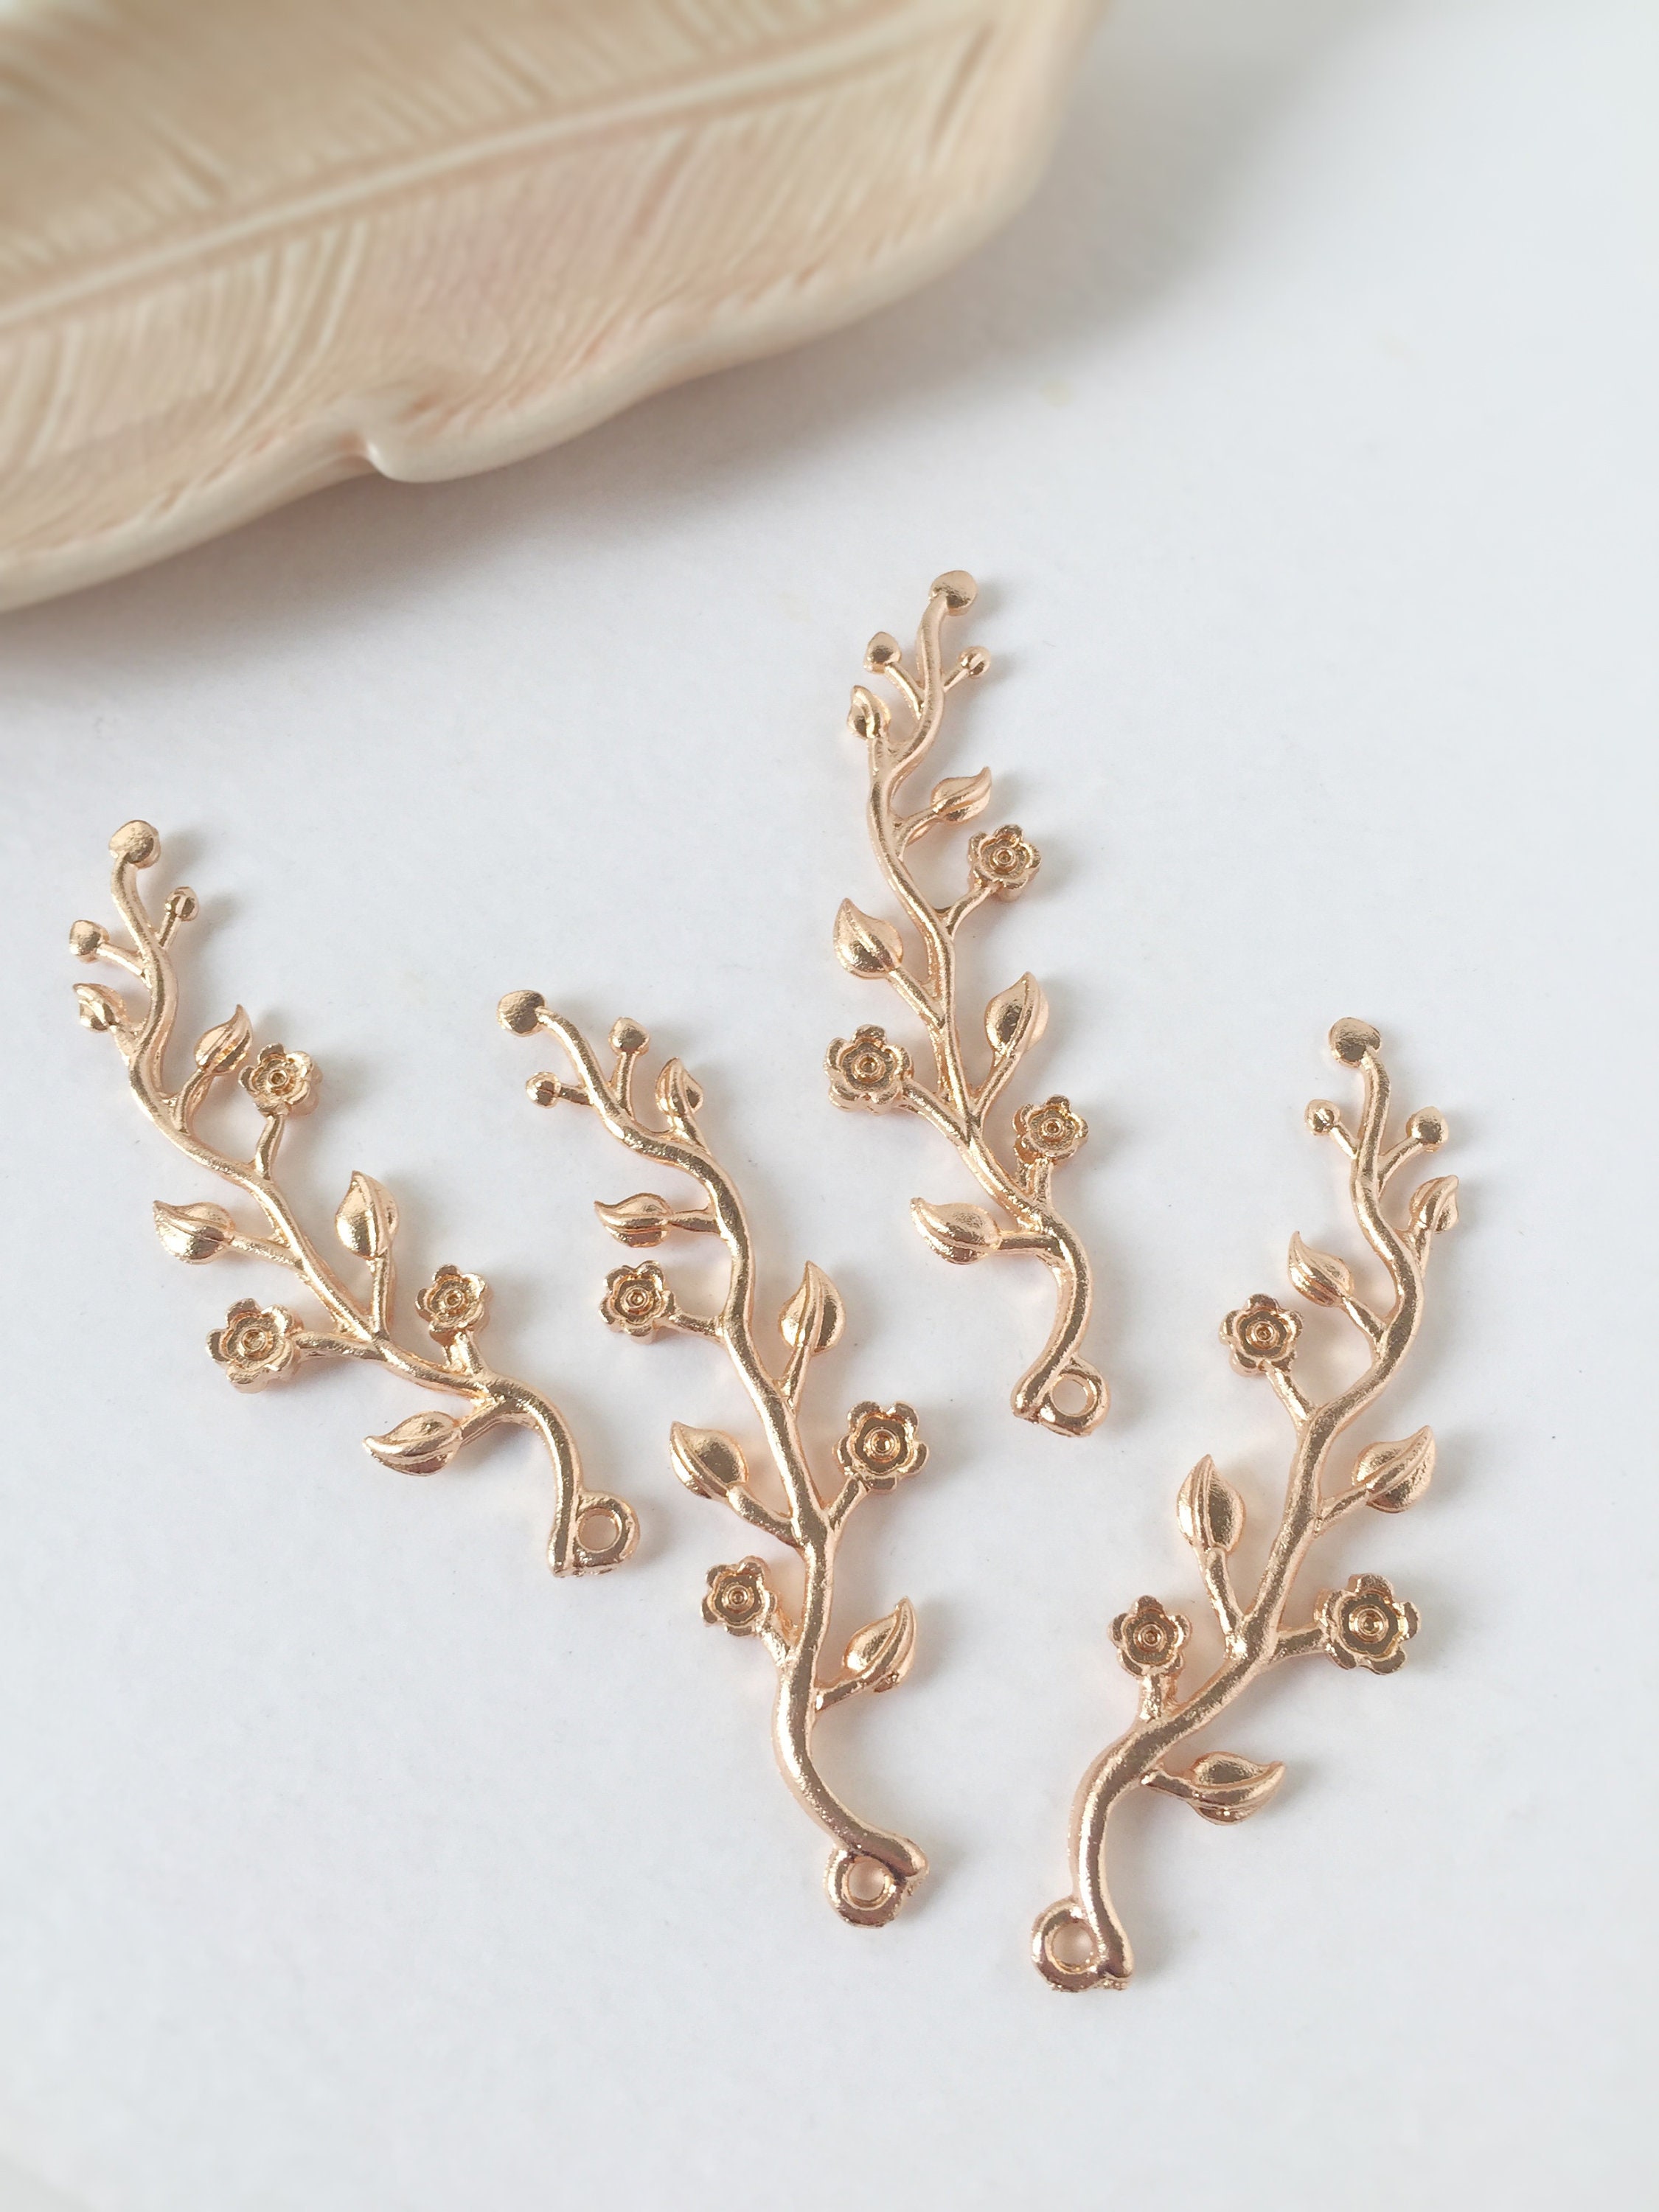 10 Pieces Branch Charms Pendants Jewelry Making Wedding Embellishment Crafts 